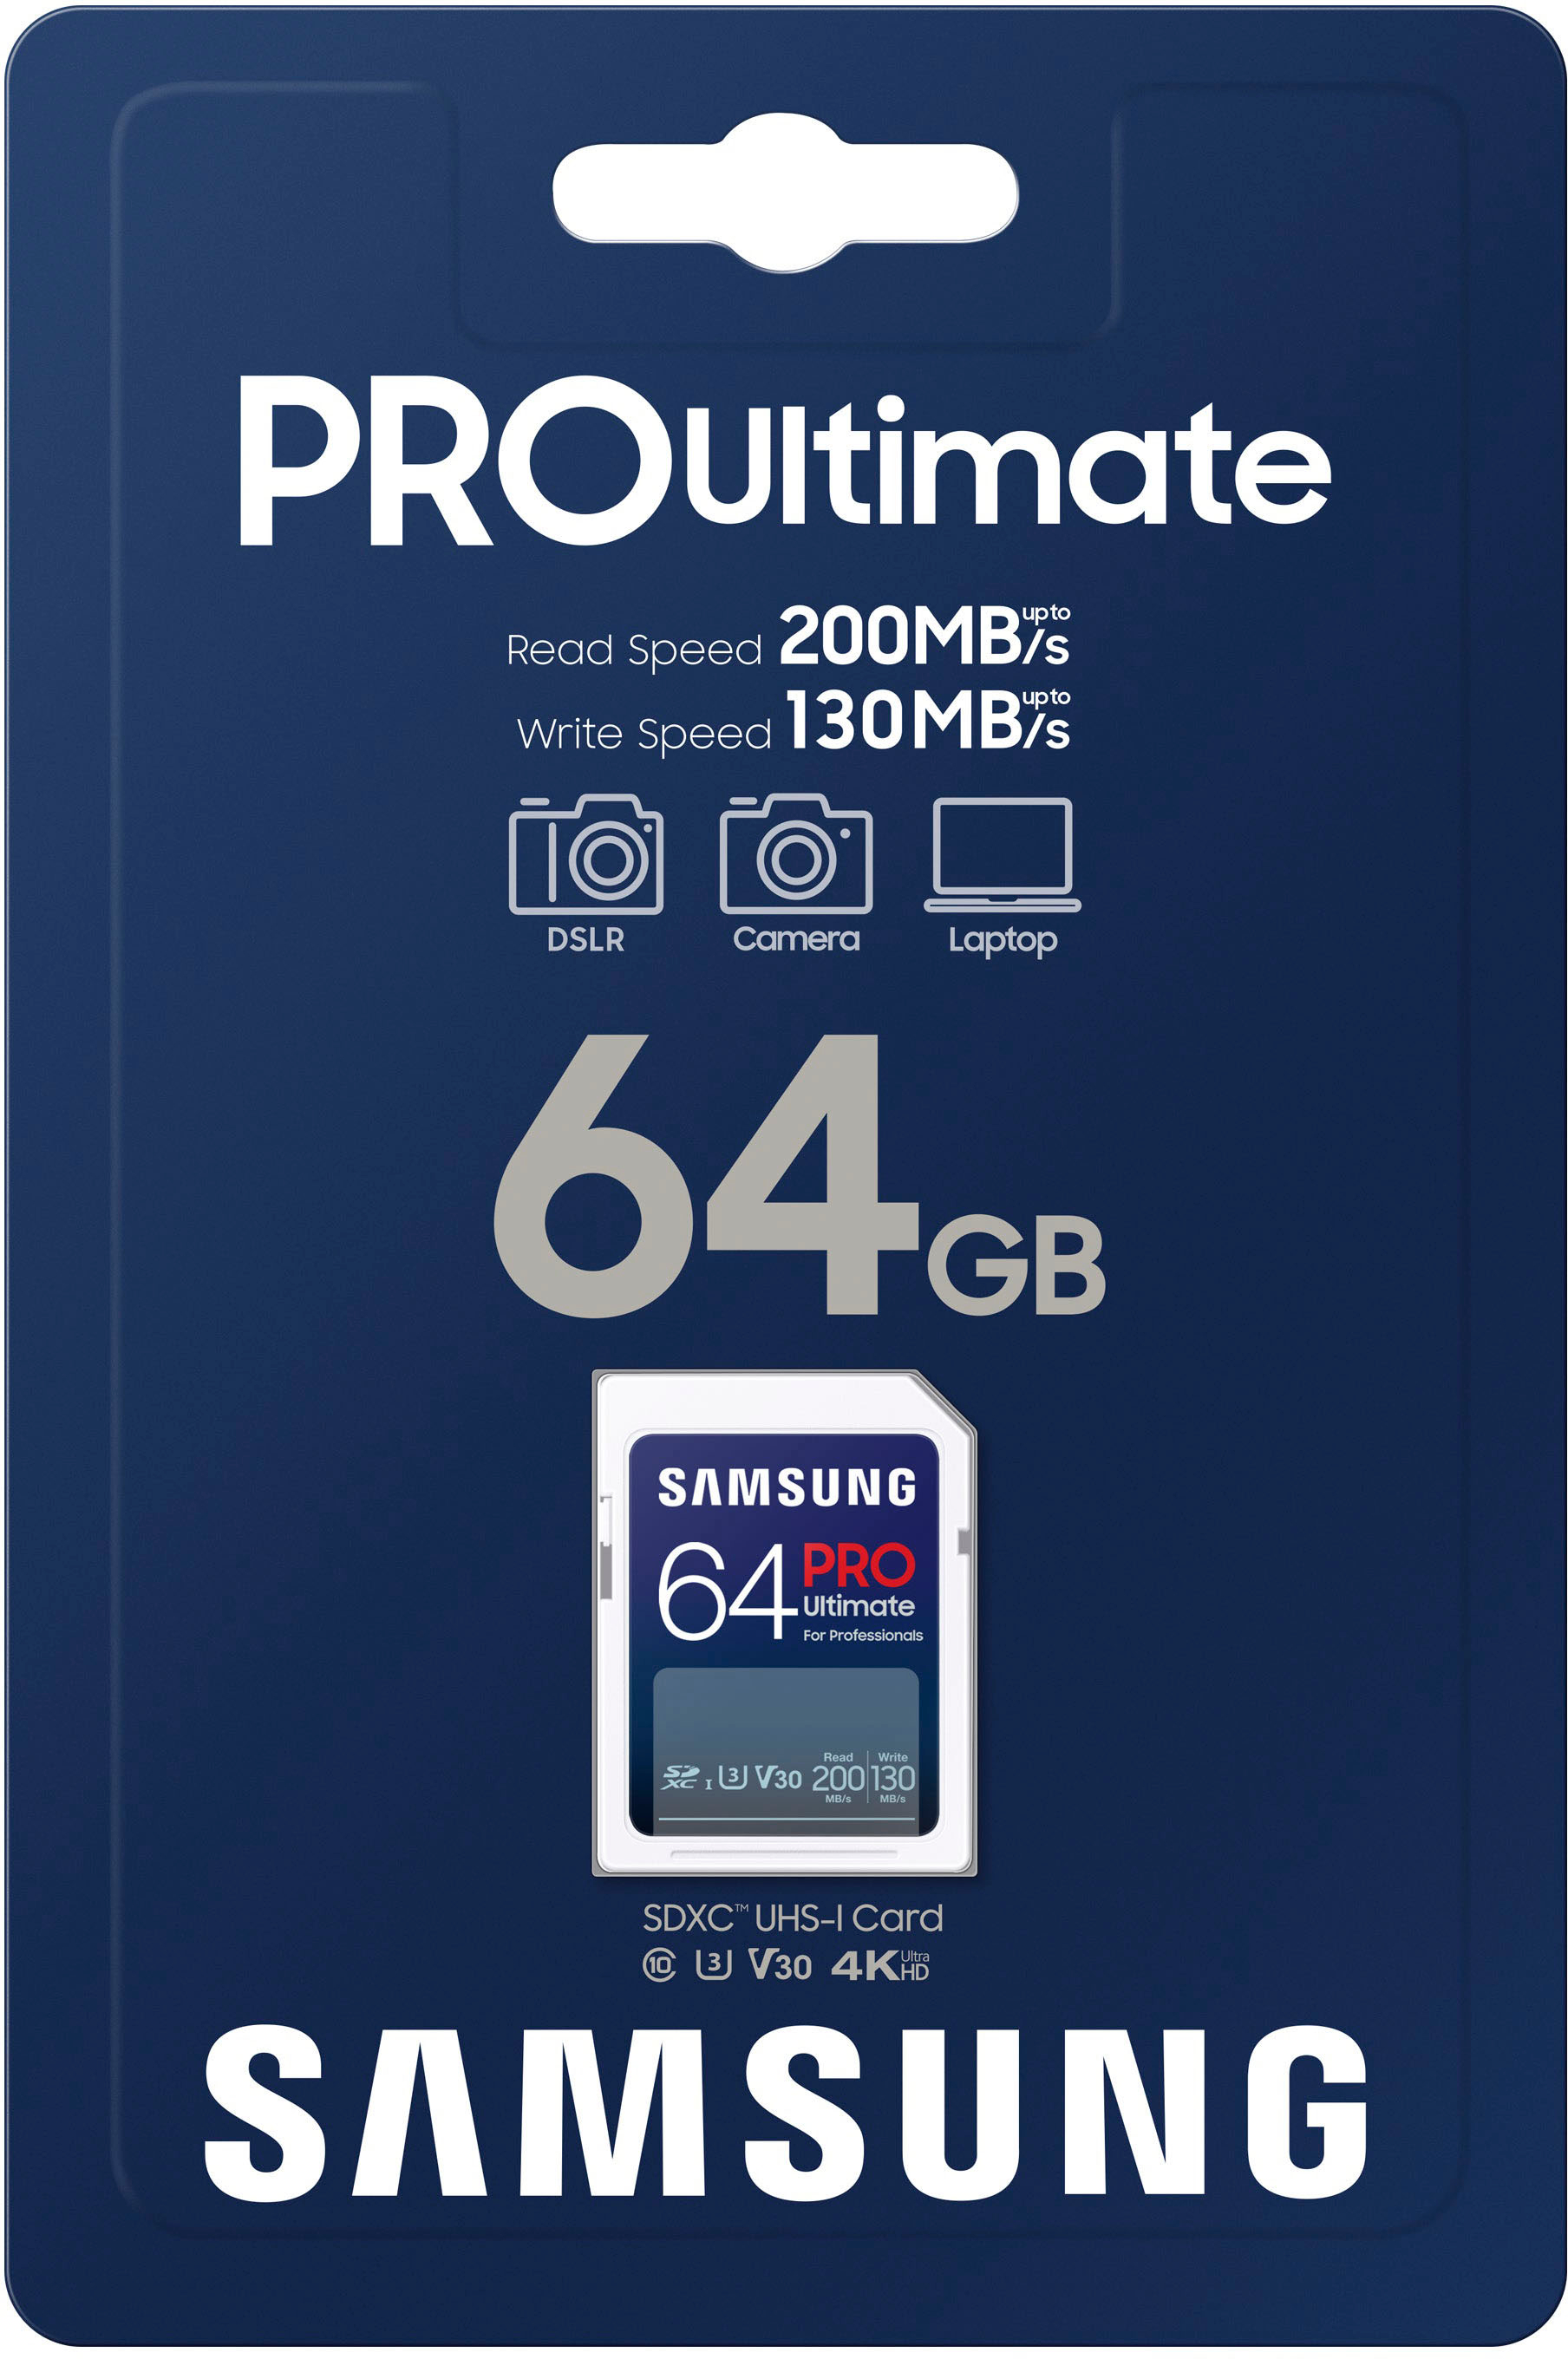 PRO Ultimate + Reader Full Size SDXC Card 64GB